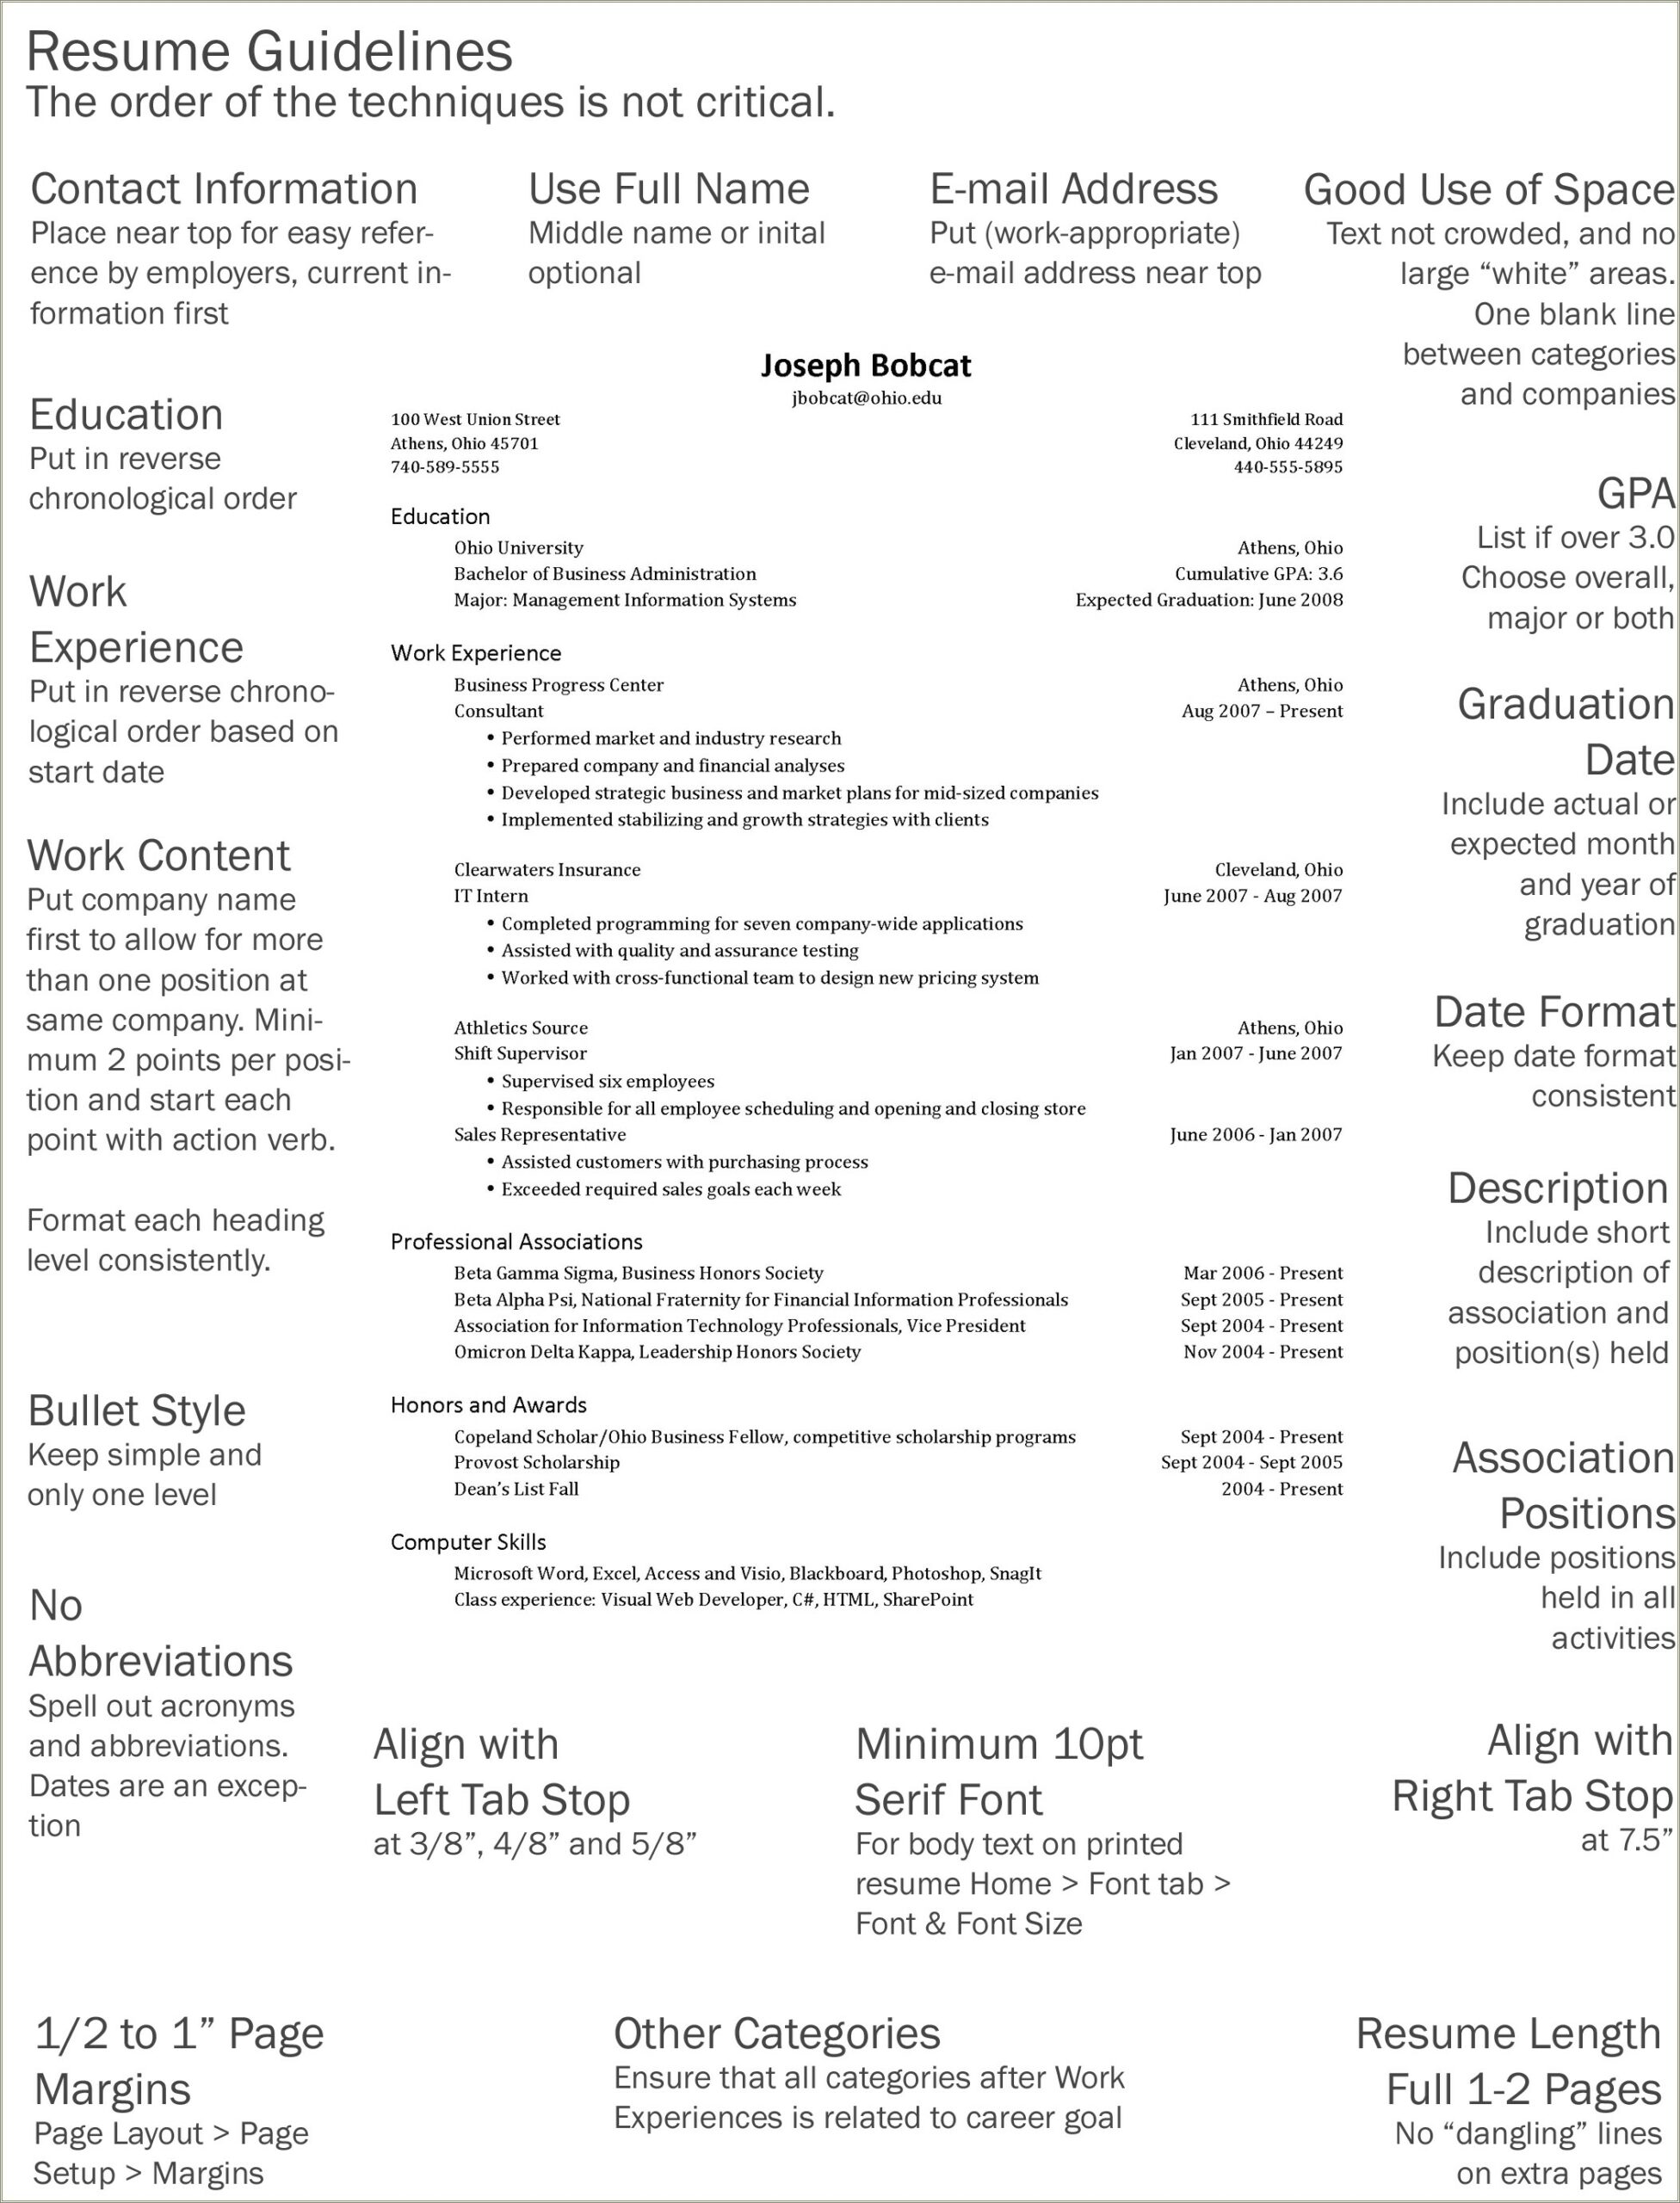 Where To Put Affiliations On Resume